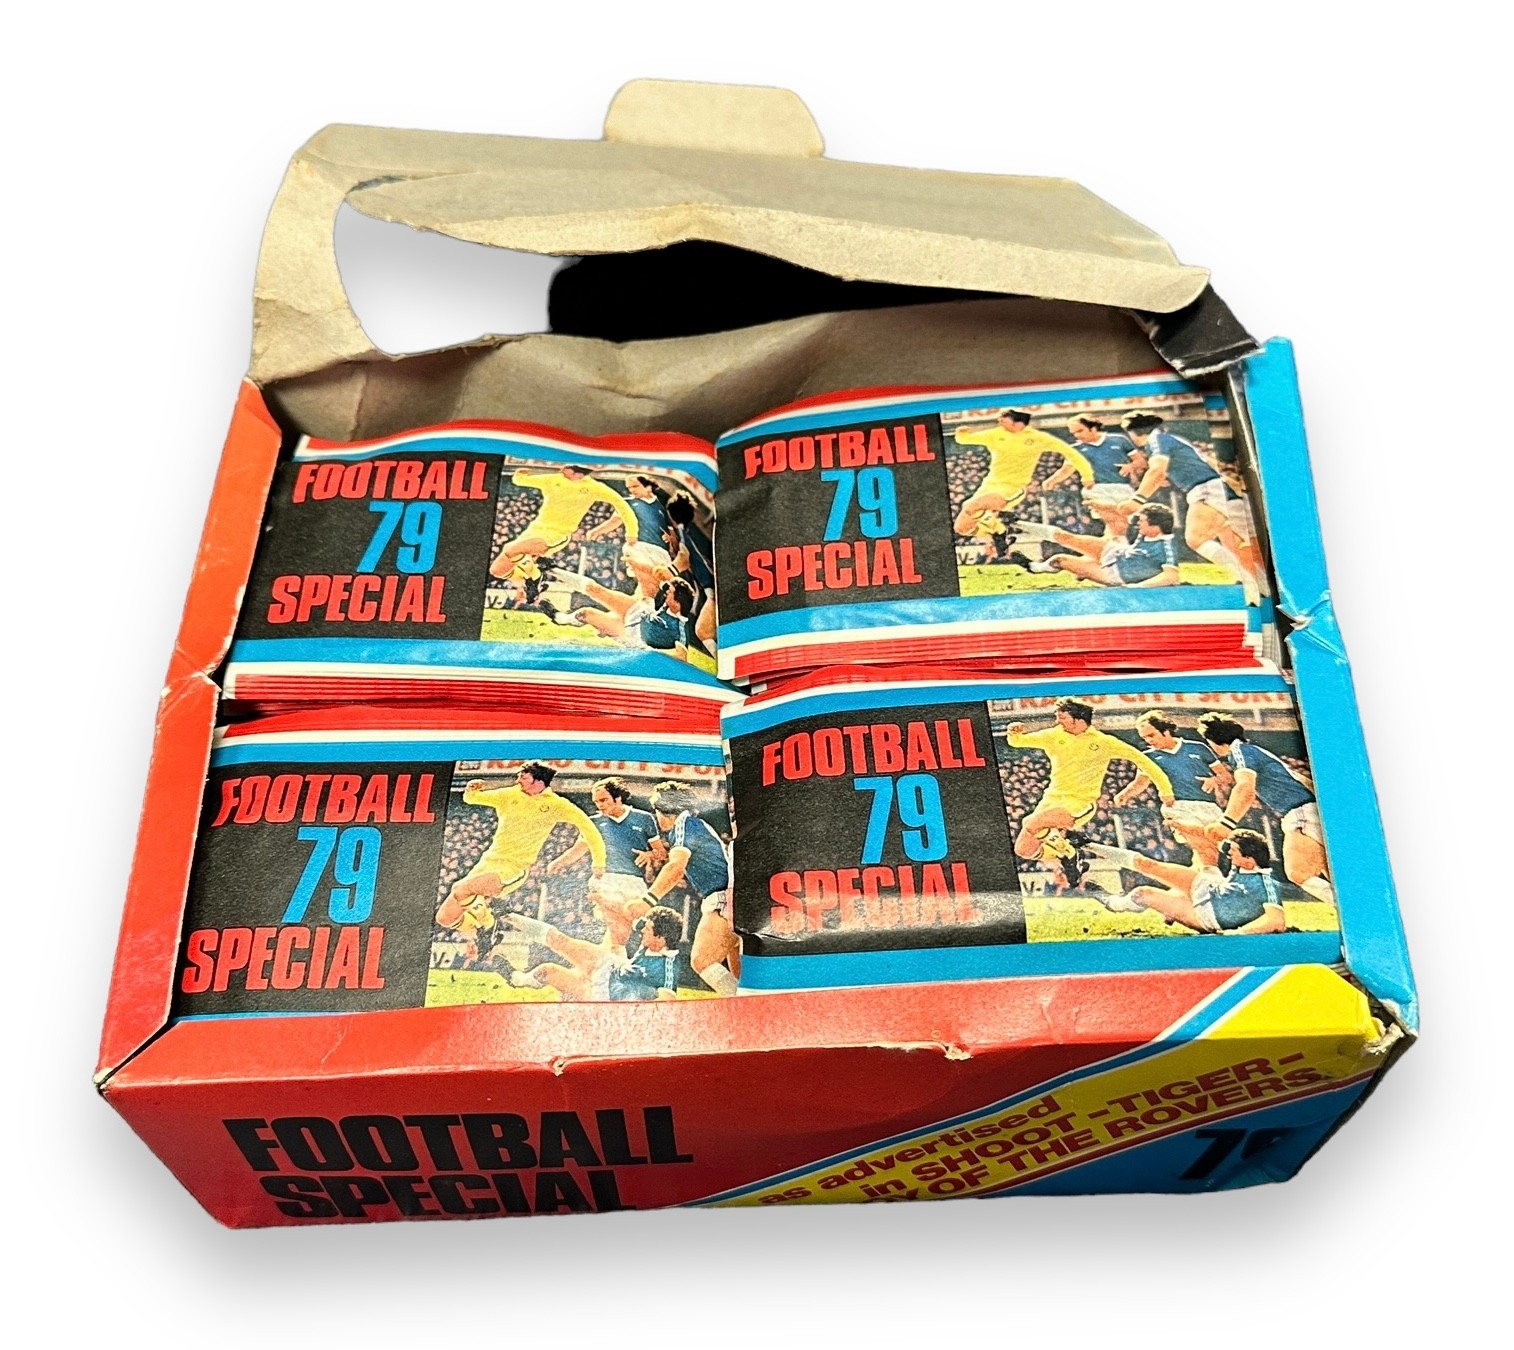 Trade stickers, Americana, 'Football Special 79', Counter Display Box containing approx. 200 packets